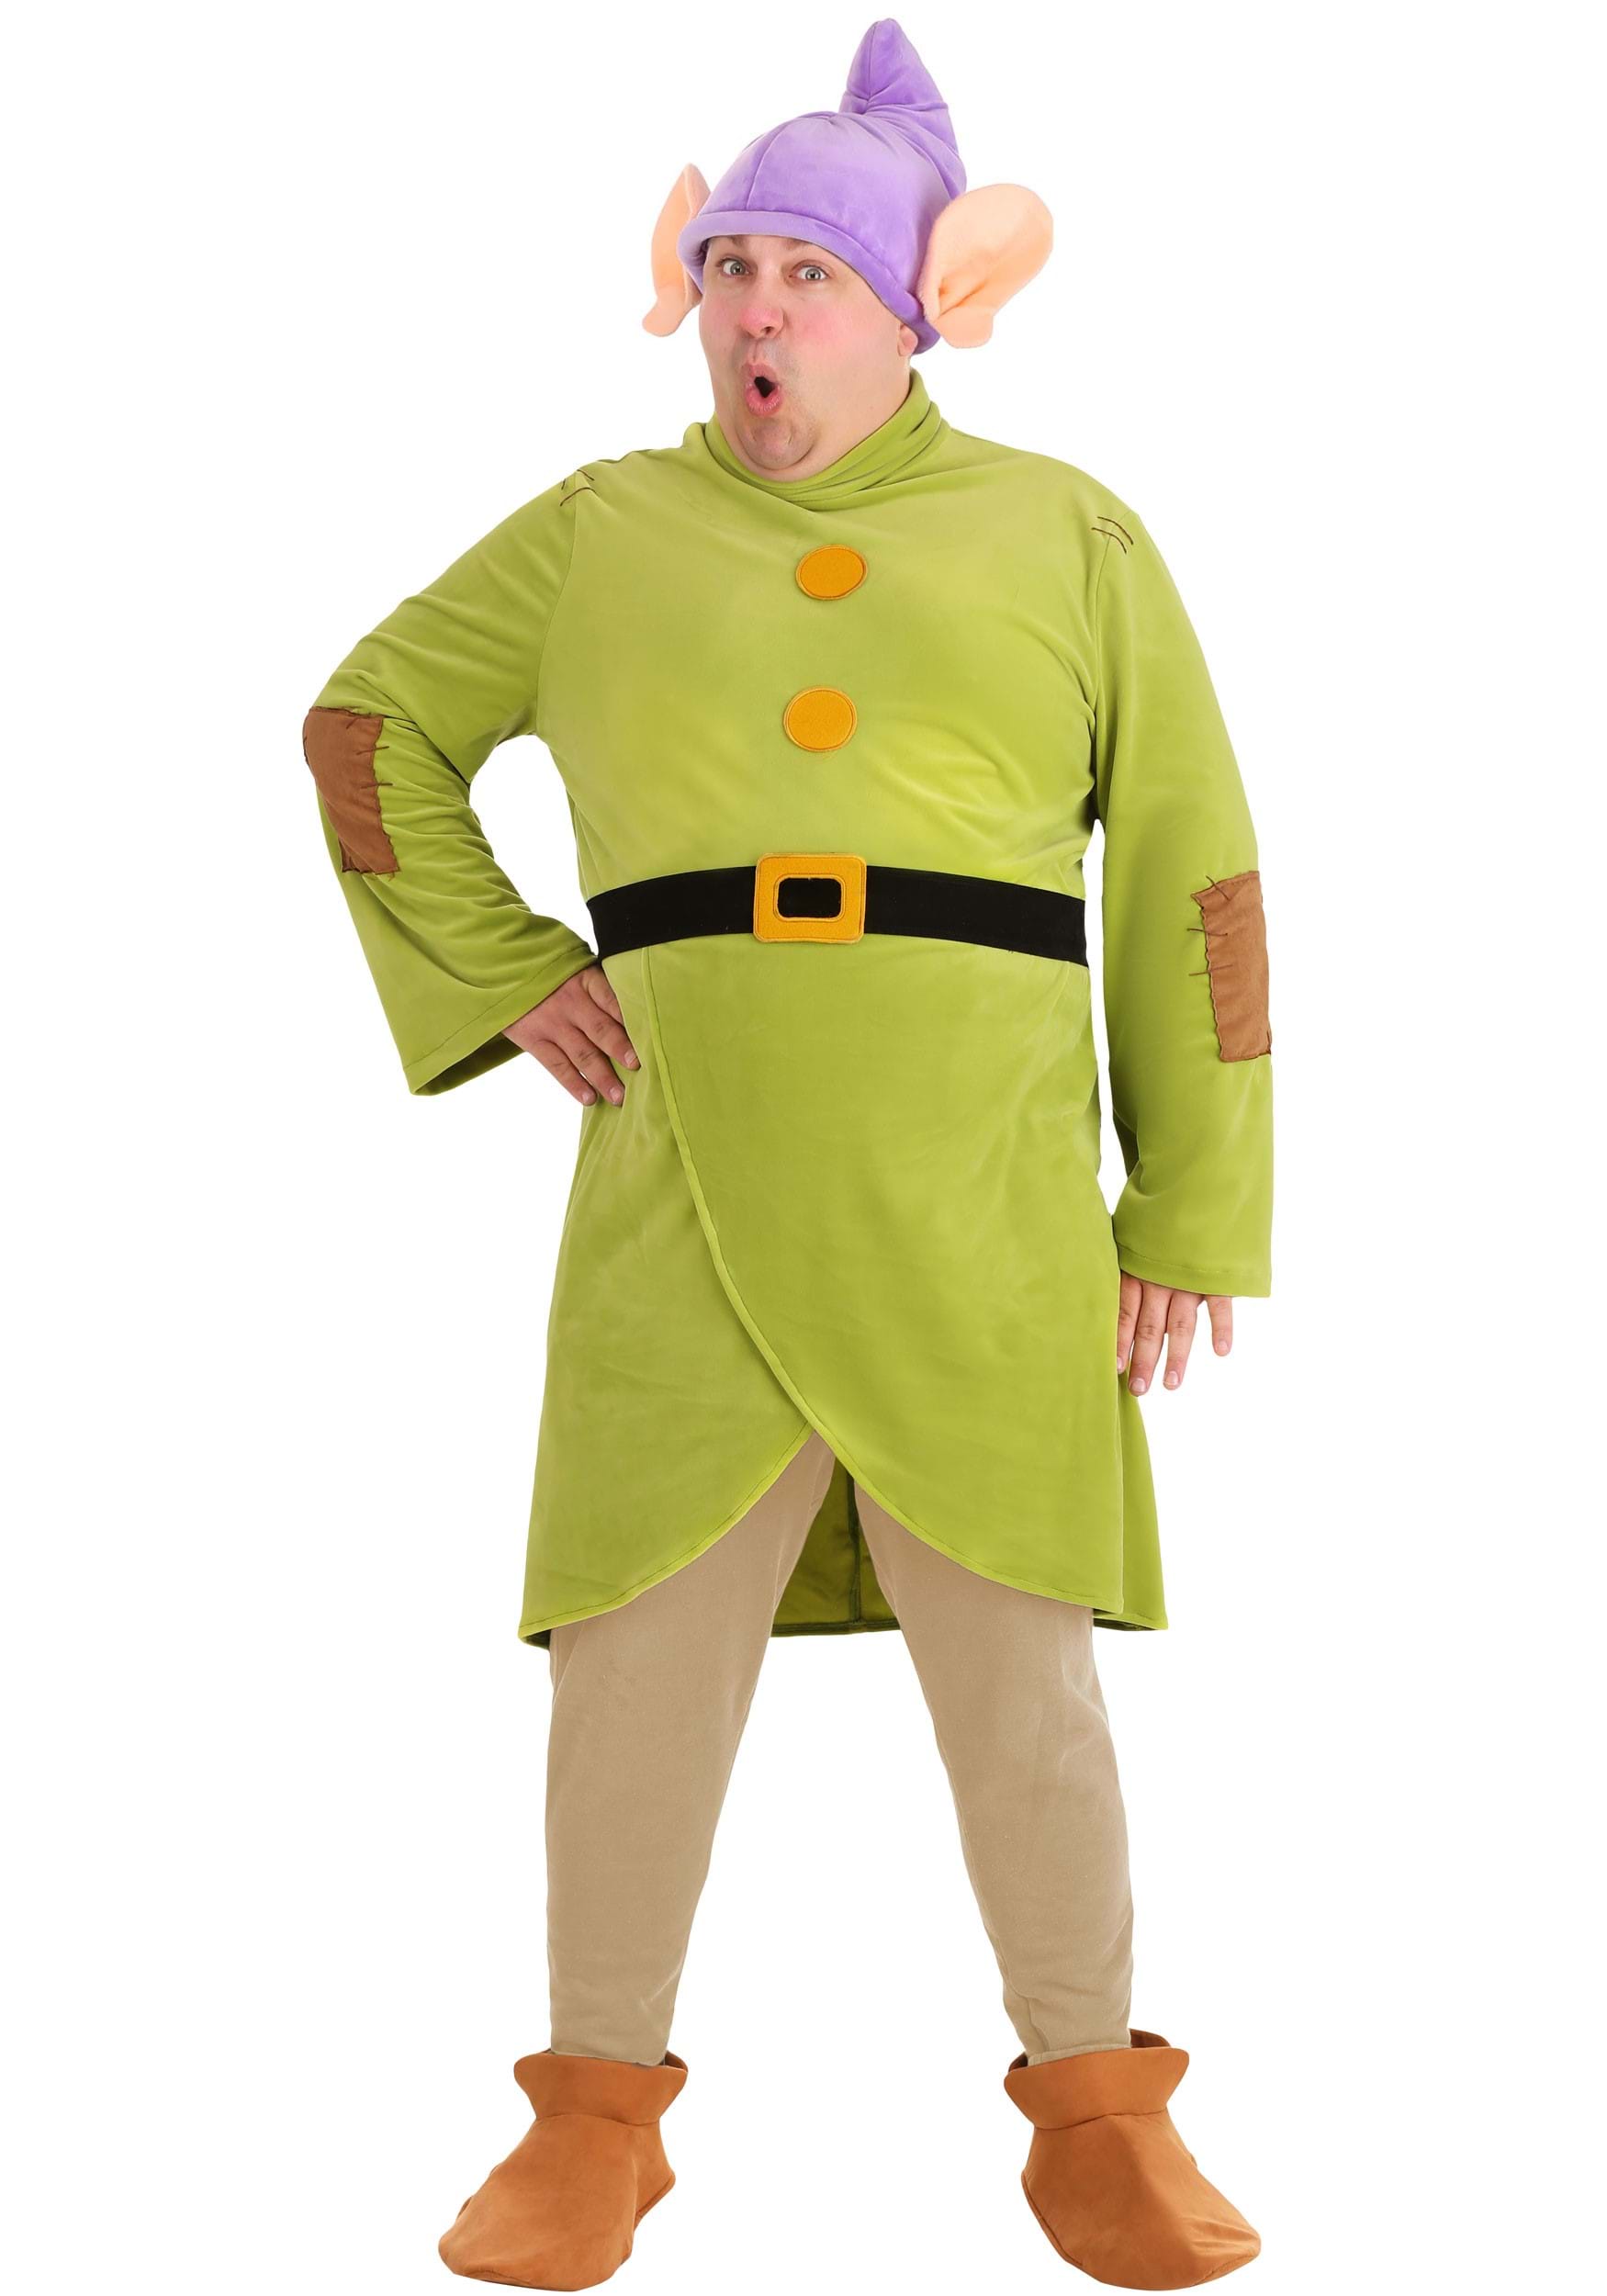 Photos - Fancy Dress FUN Costumes Plus Size Snow White Dopey Costume for Adults Black/Green